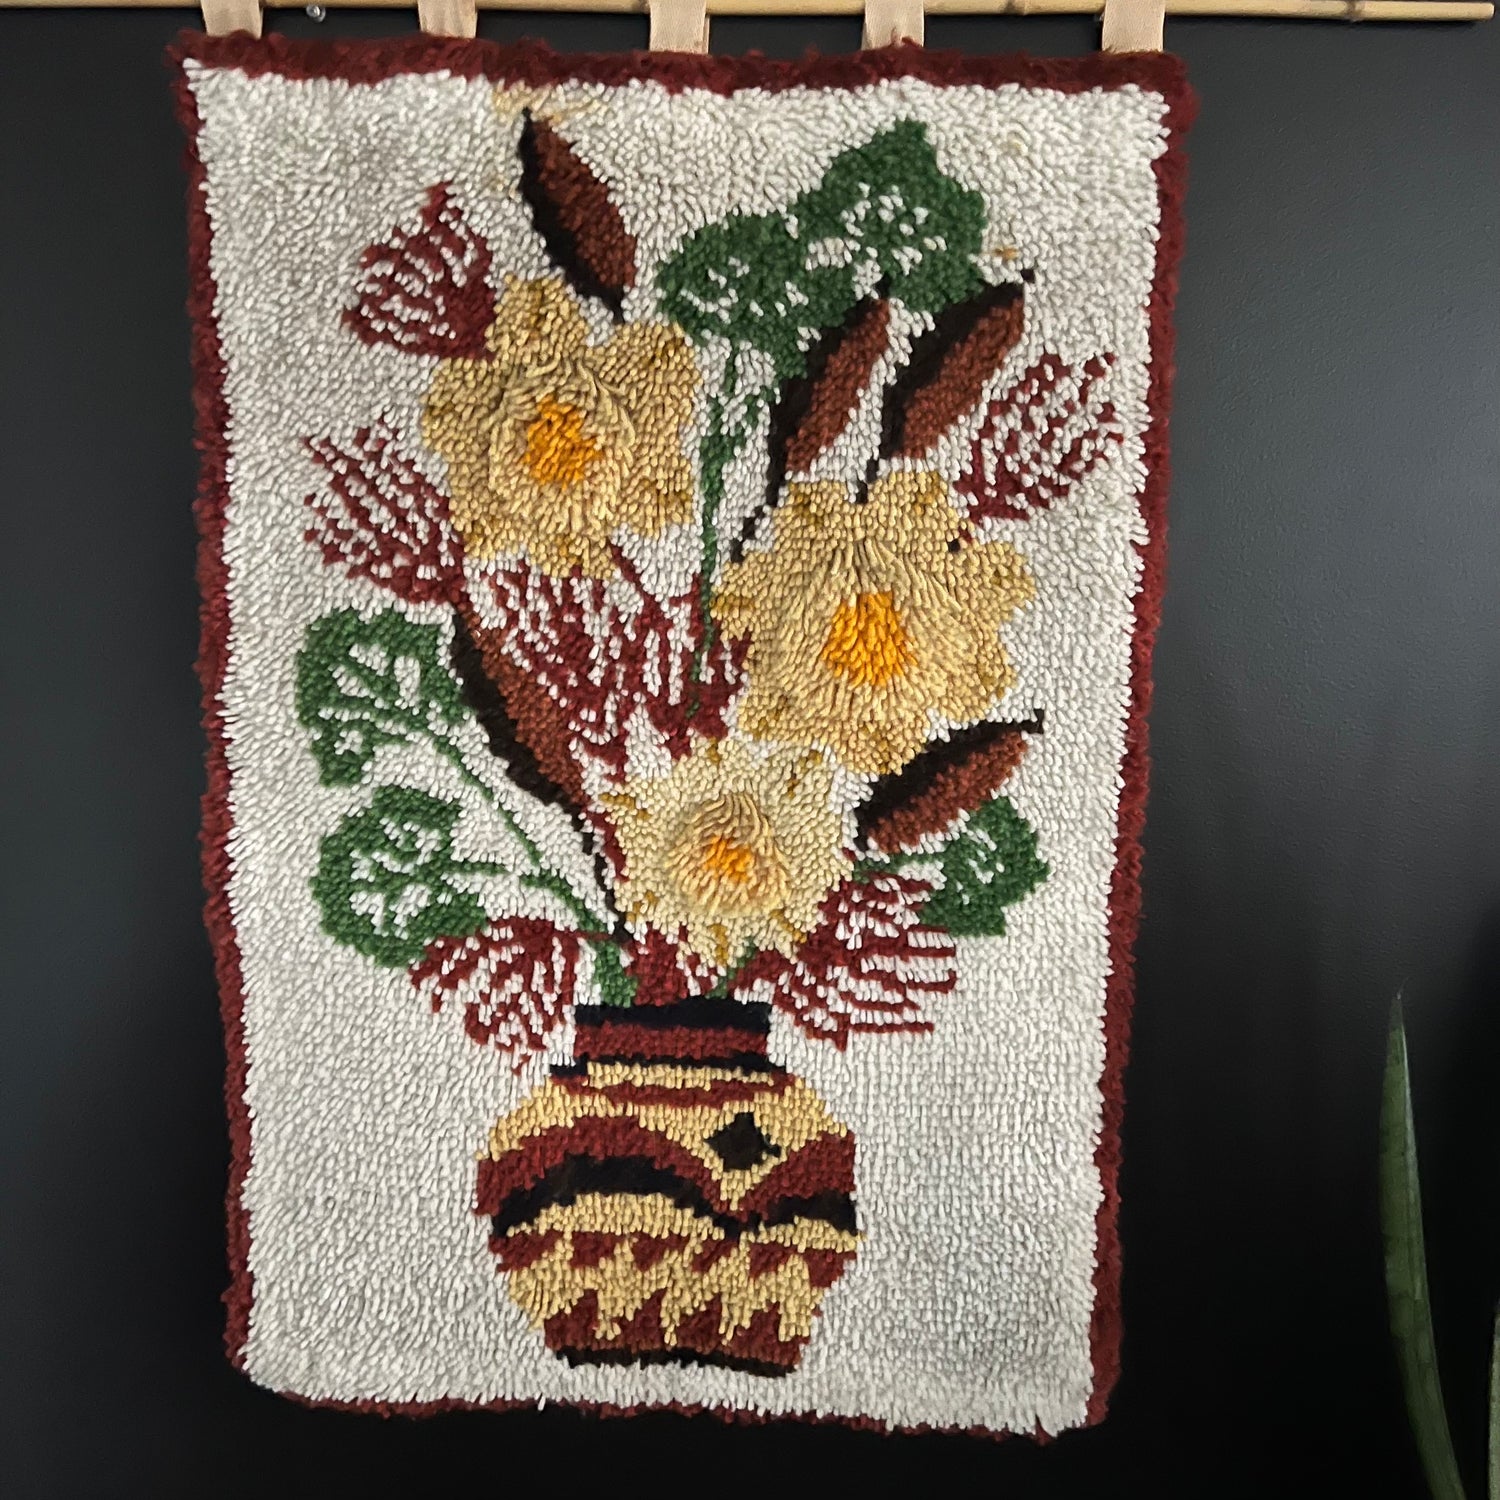 hooked rug with yellow flowers in a brown and yellow vase.